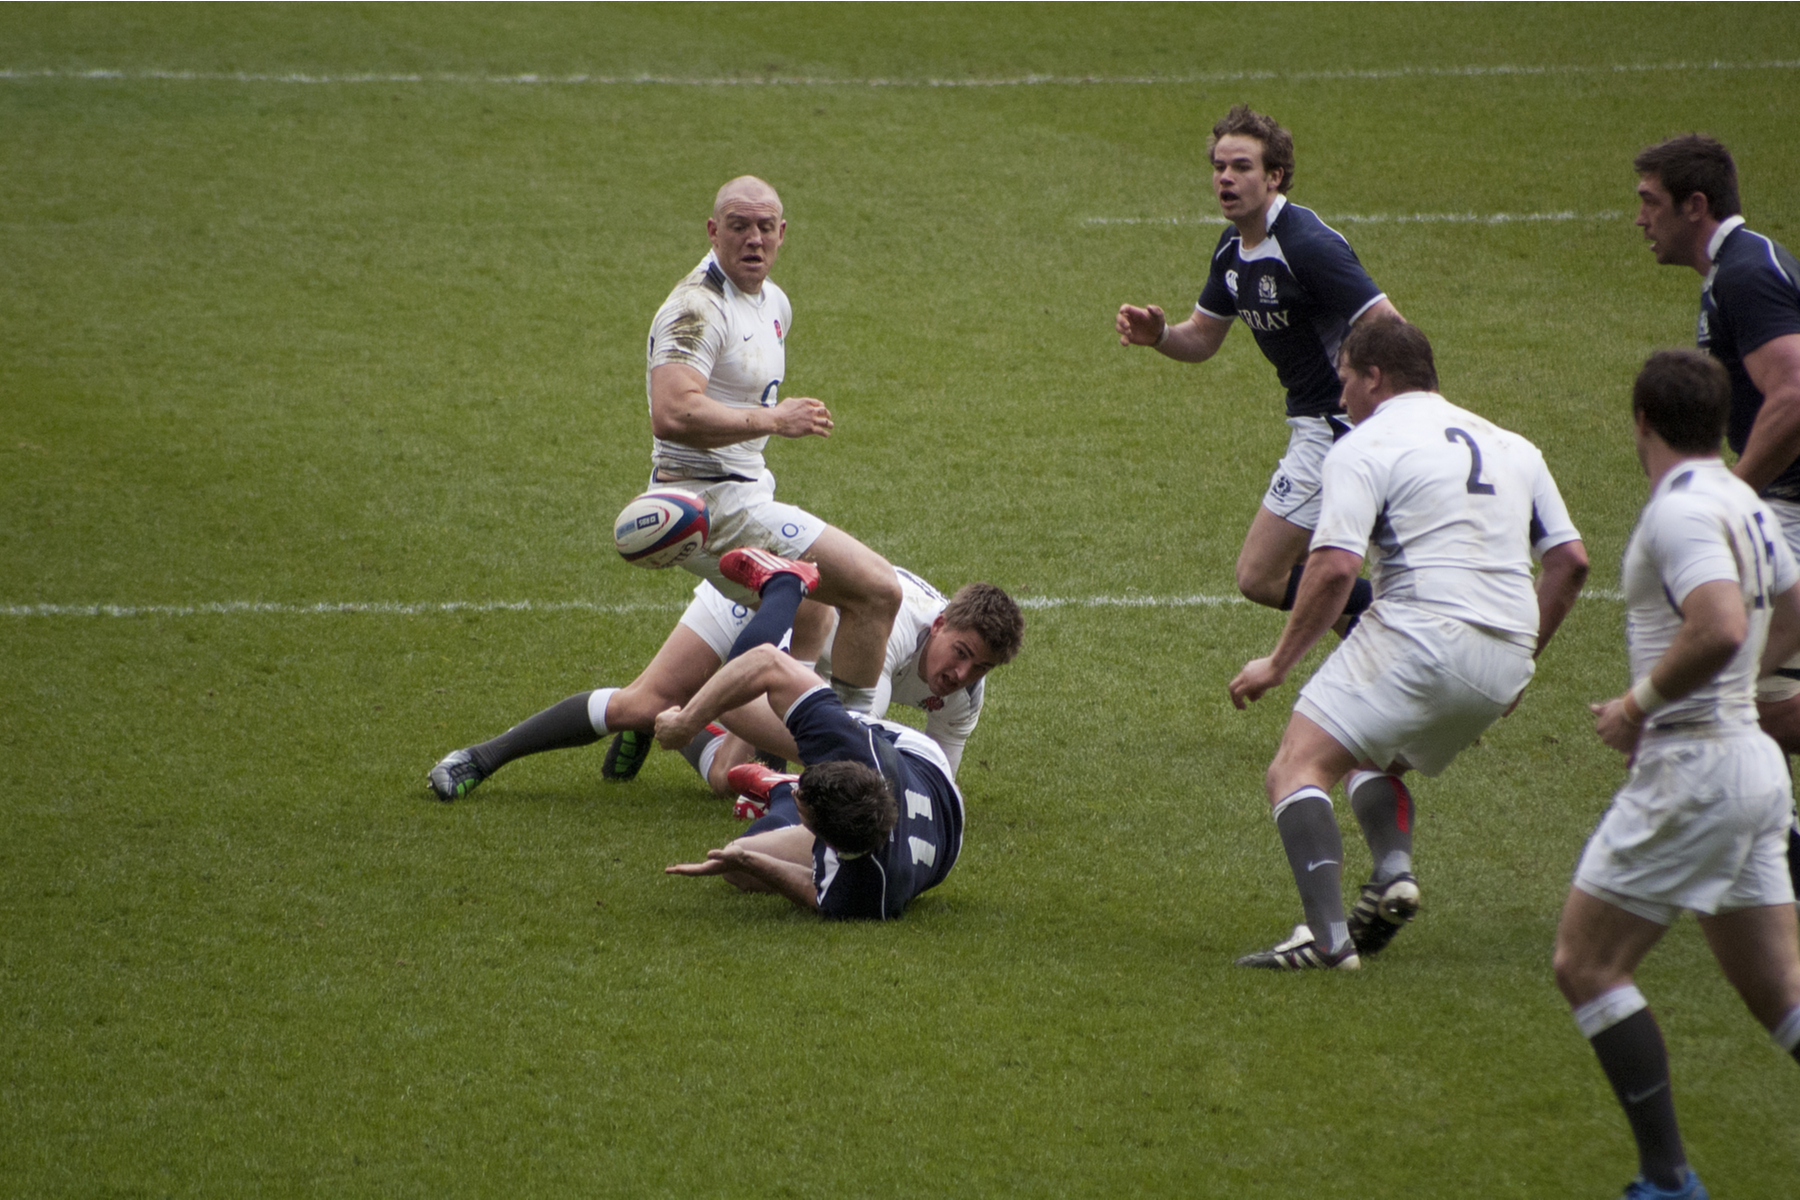 rugby player fumbles a ball during a match